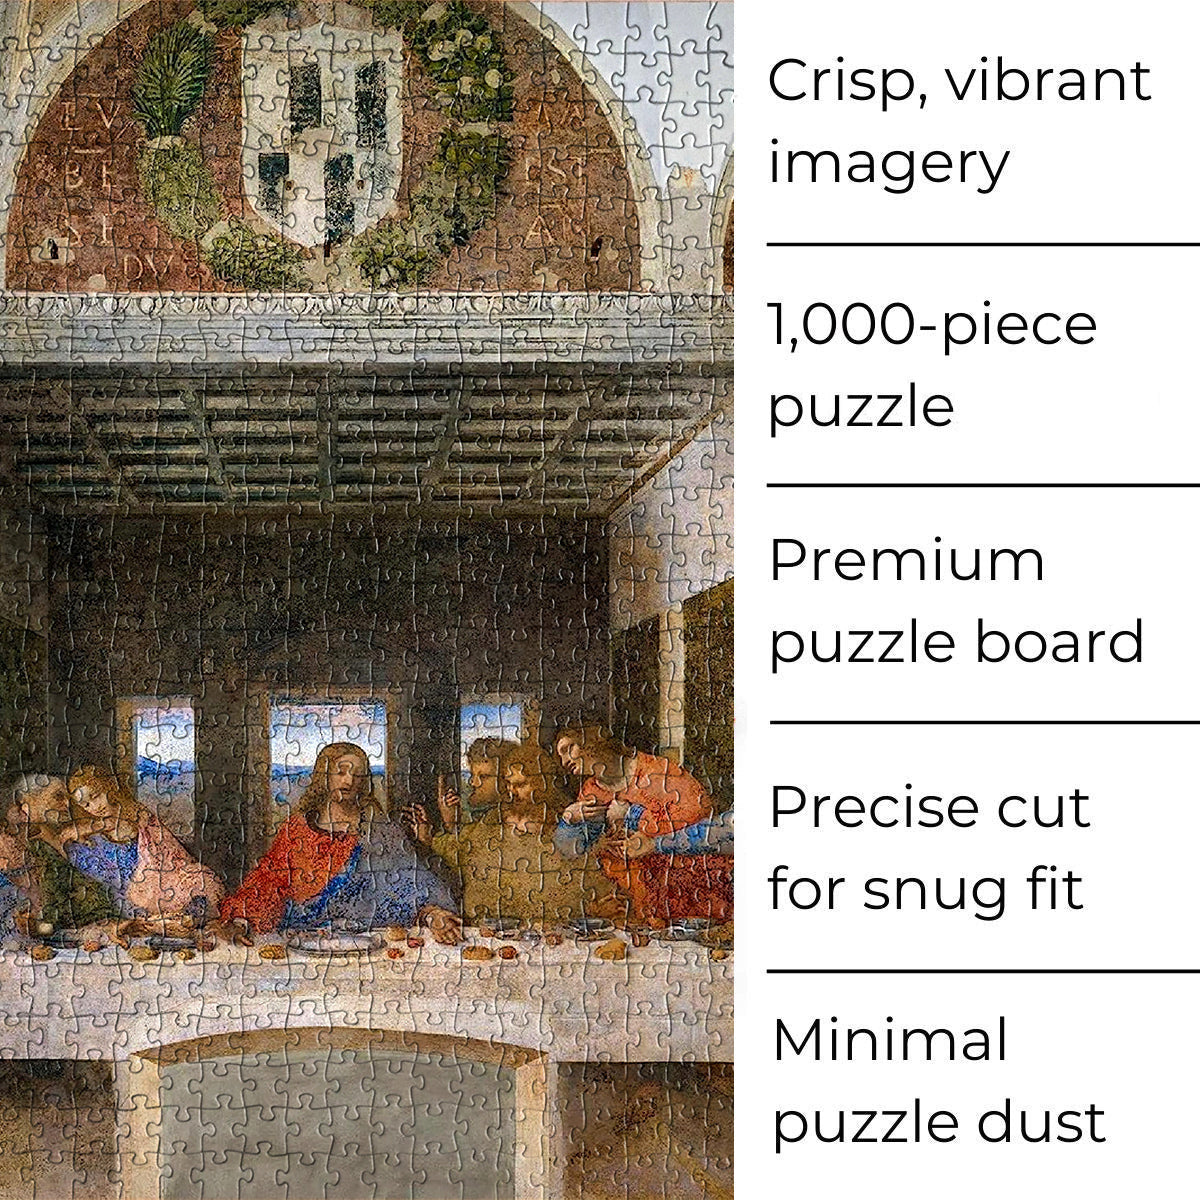 Last Supper 1000 Piece Jigsaw Puzzle